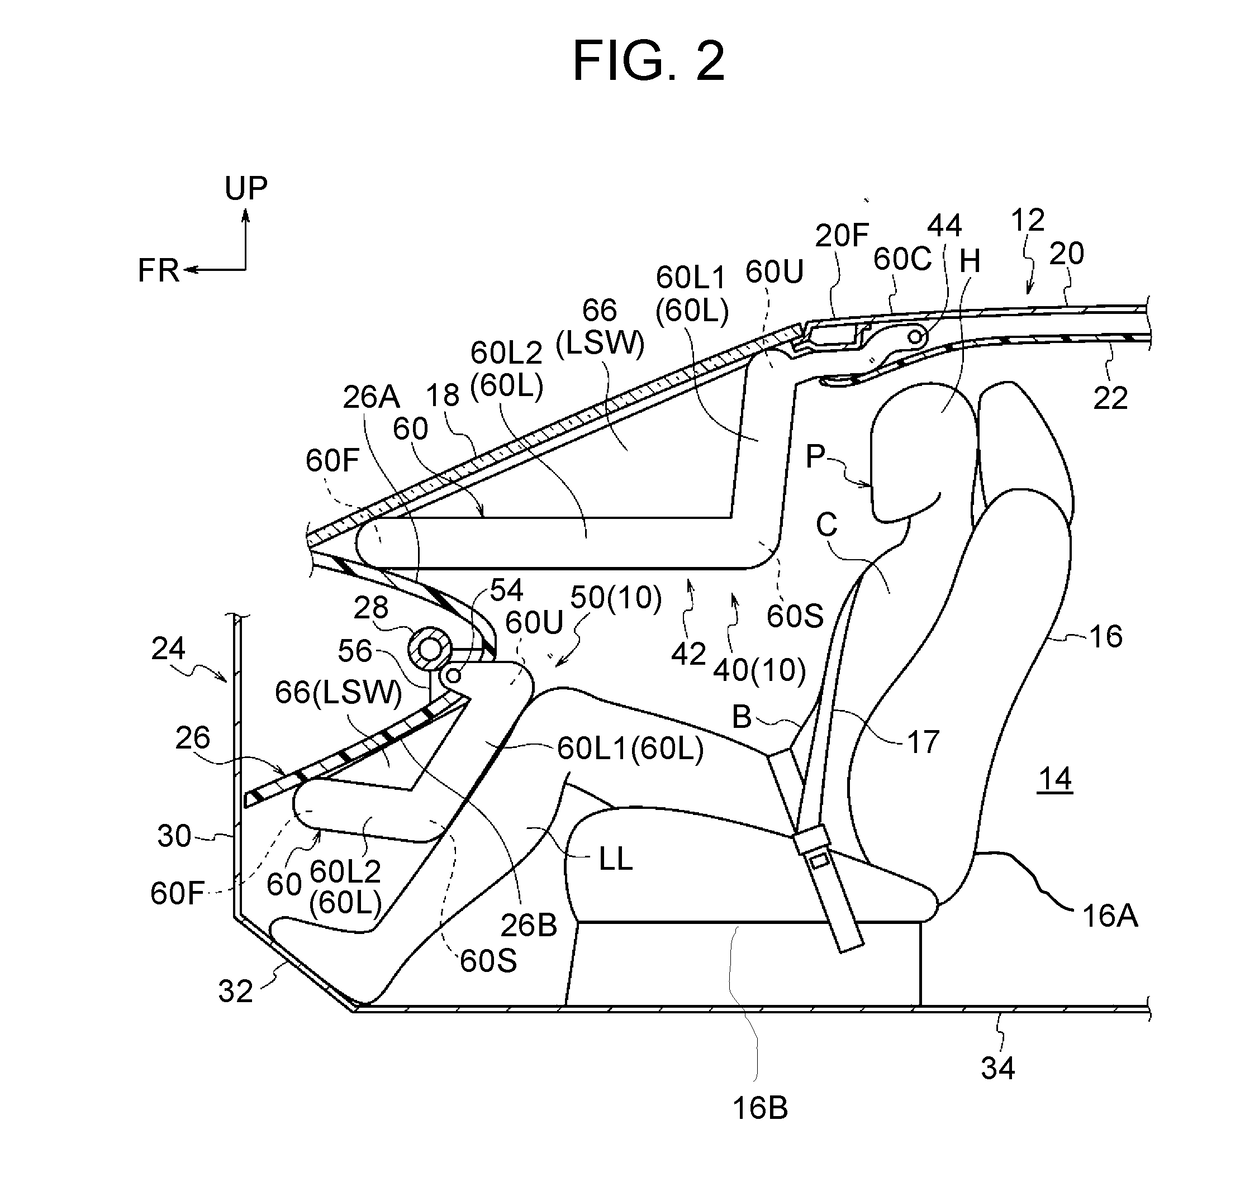 Passenger protection device for front passenger seat